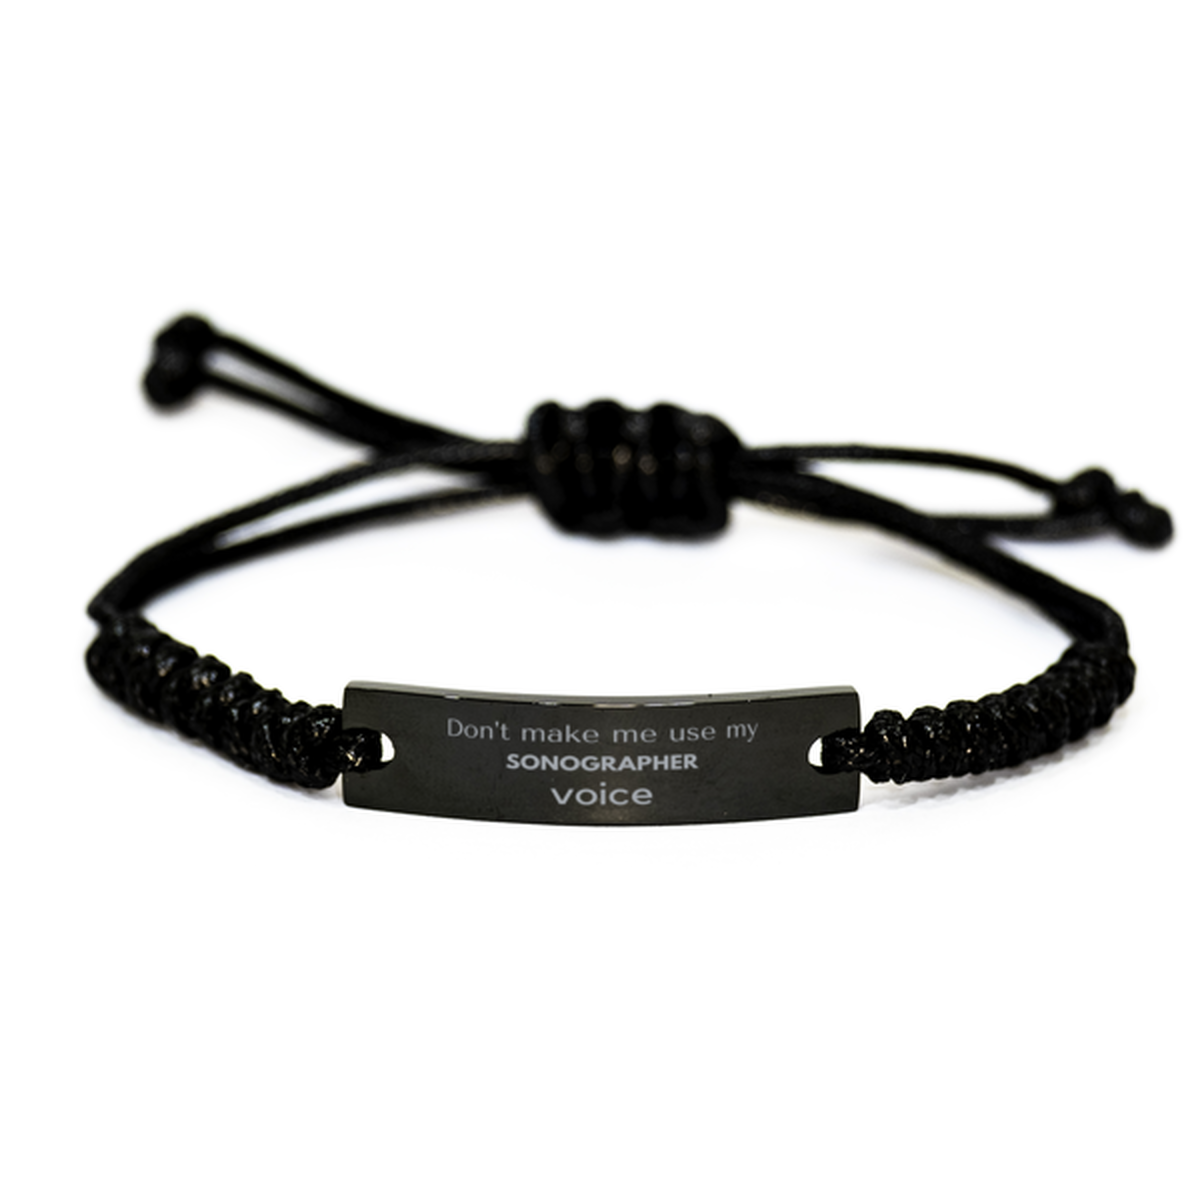 Don't make me use my Sonographer voice, Sarcasm Sonographer Gifts, Christmas Sonographer Black Rope Bracelet Birthday Unique Gifts For Sonographer Coworkers, Men, Women, Colleague, Friends